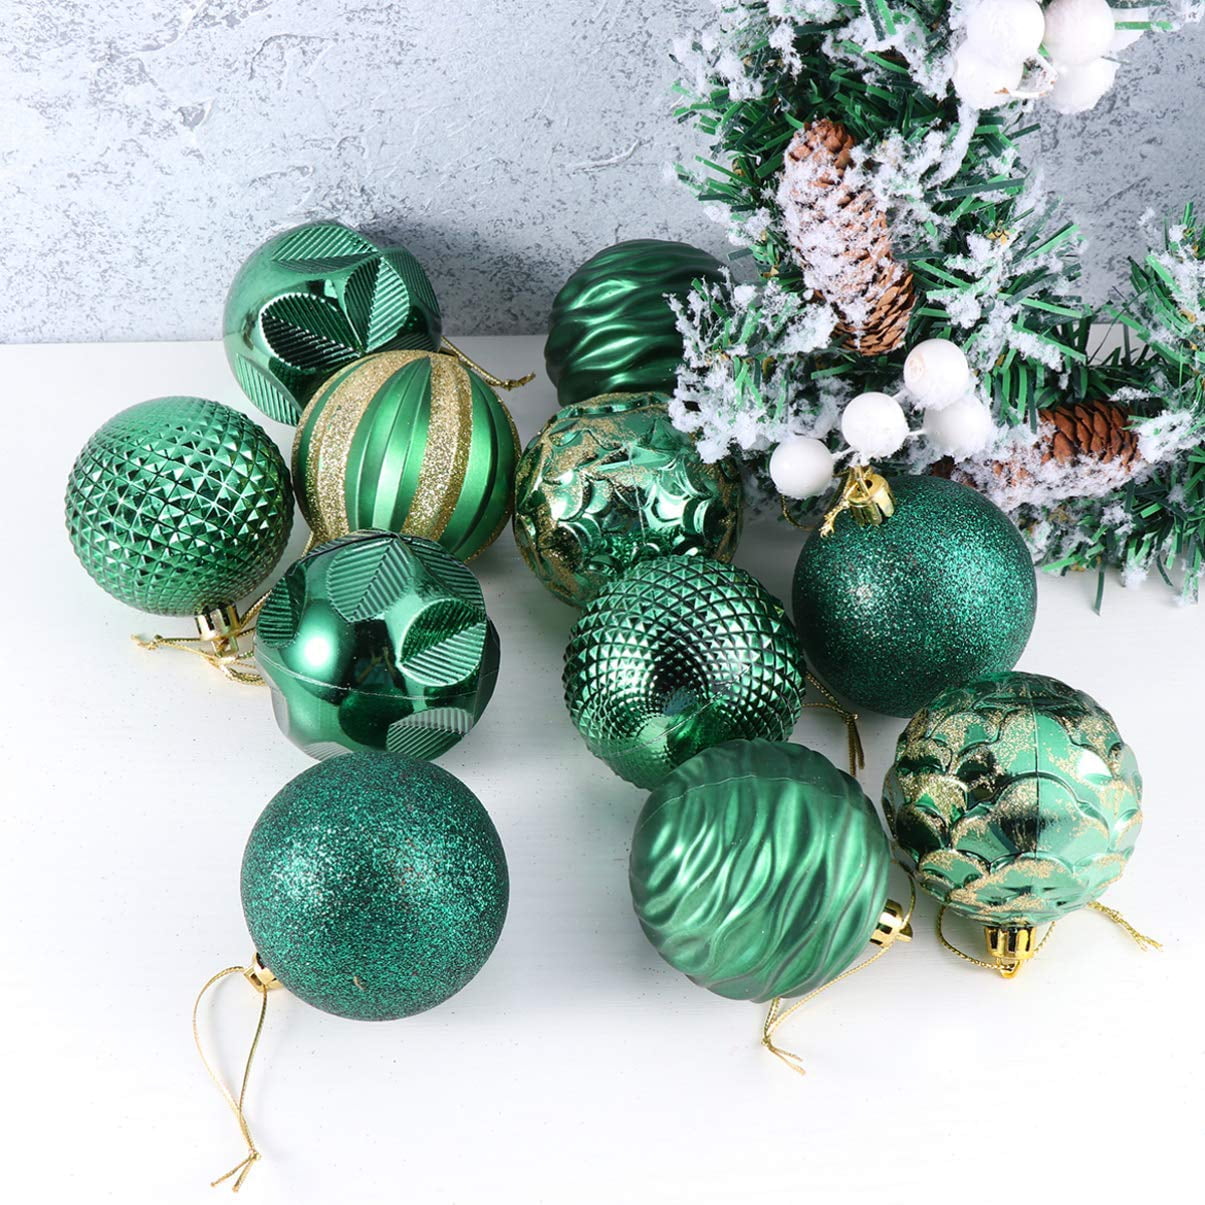 Ornament Blanks w/Hooks Included -Decorate & Paint Your Own Xmas Memories Fun Holiday Activities 12 Pack 2¼“ Shatterproof Balls for Holiday Party DIY Christmas Tree Decorative Ball Ornaments